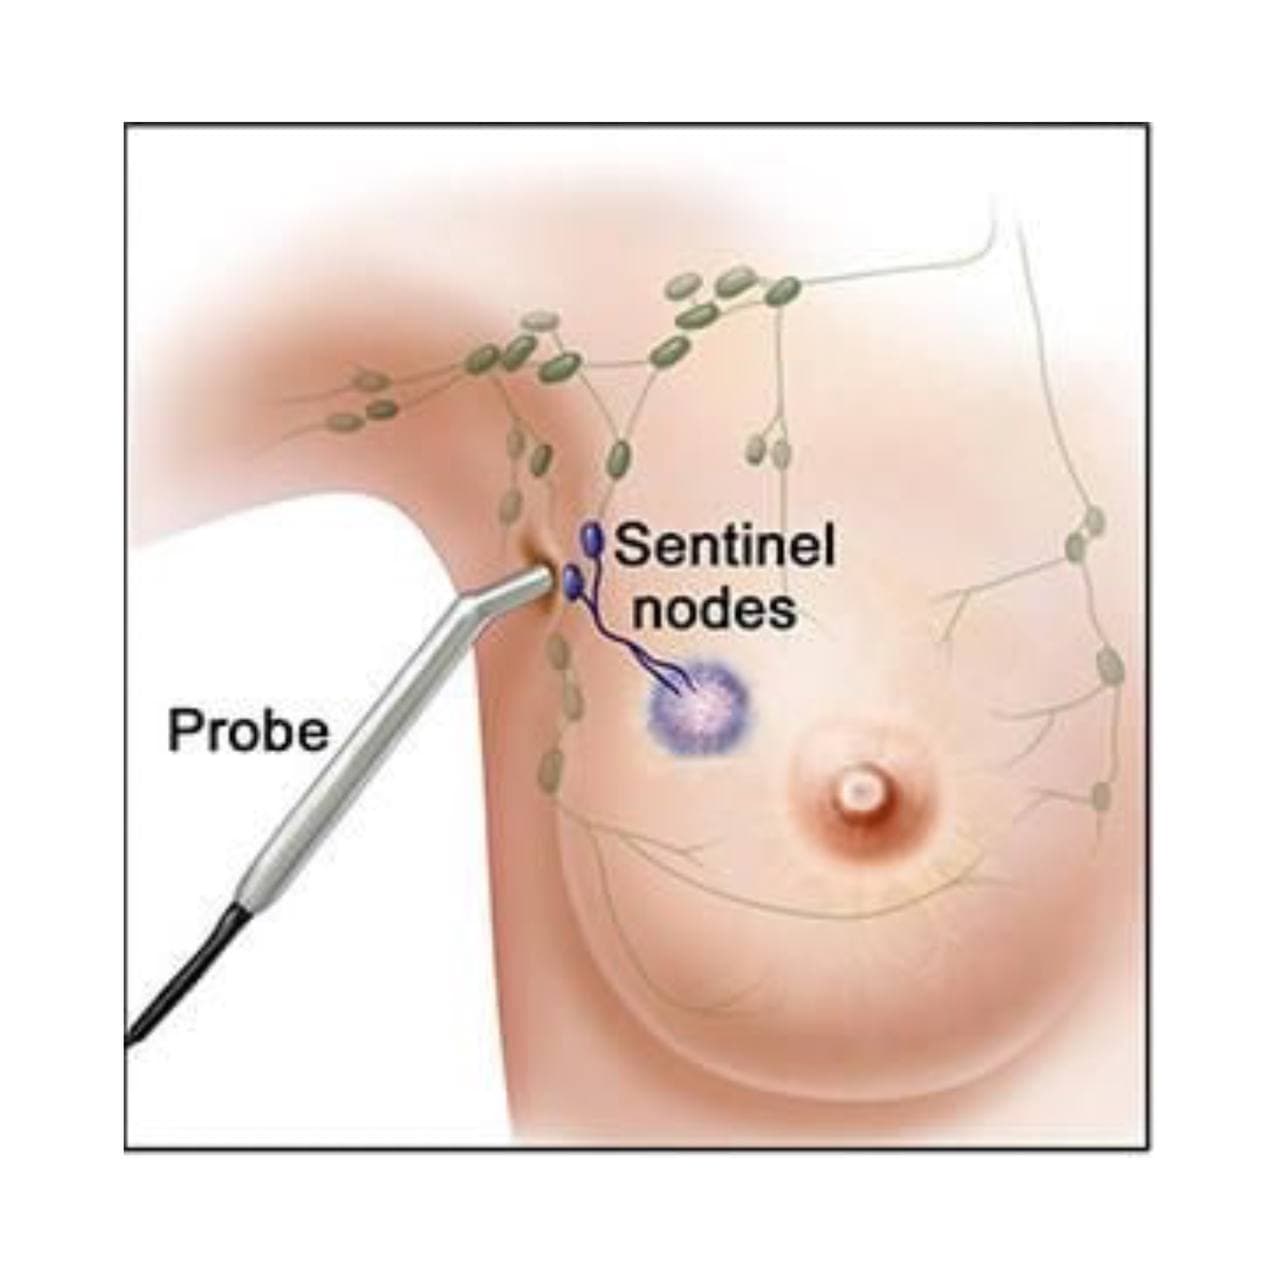 Protrusion of the mammary lymph nodes